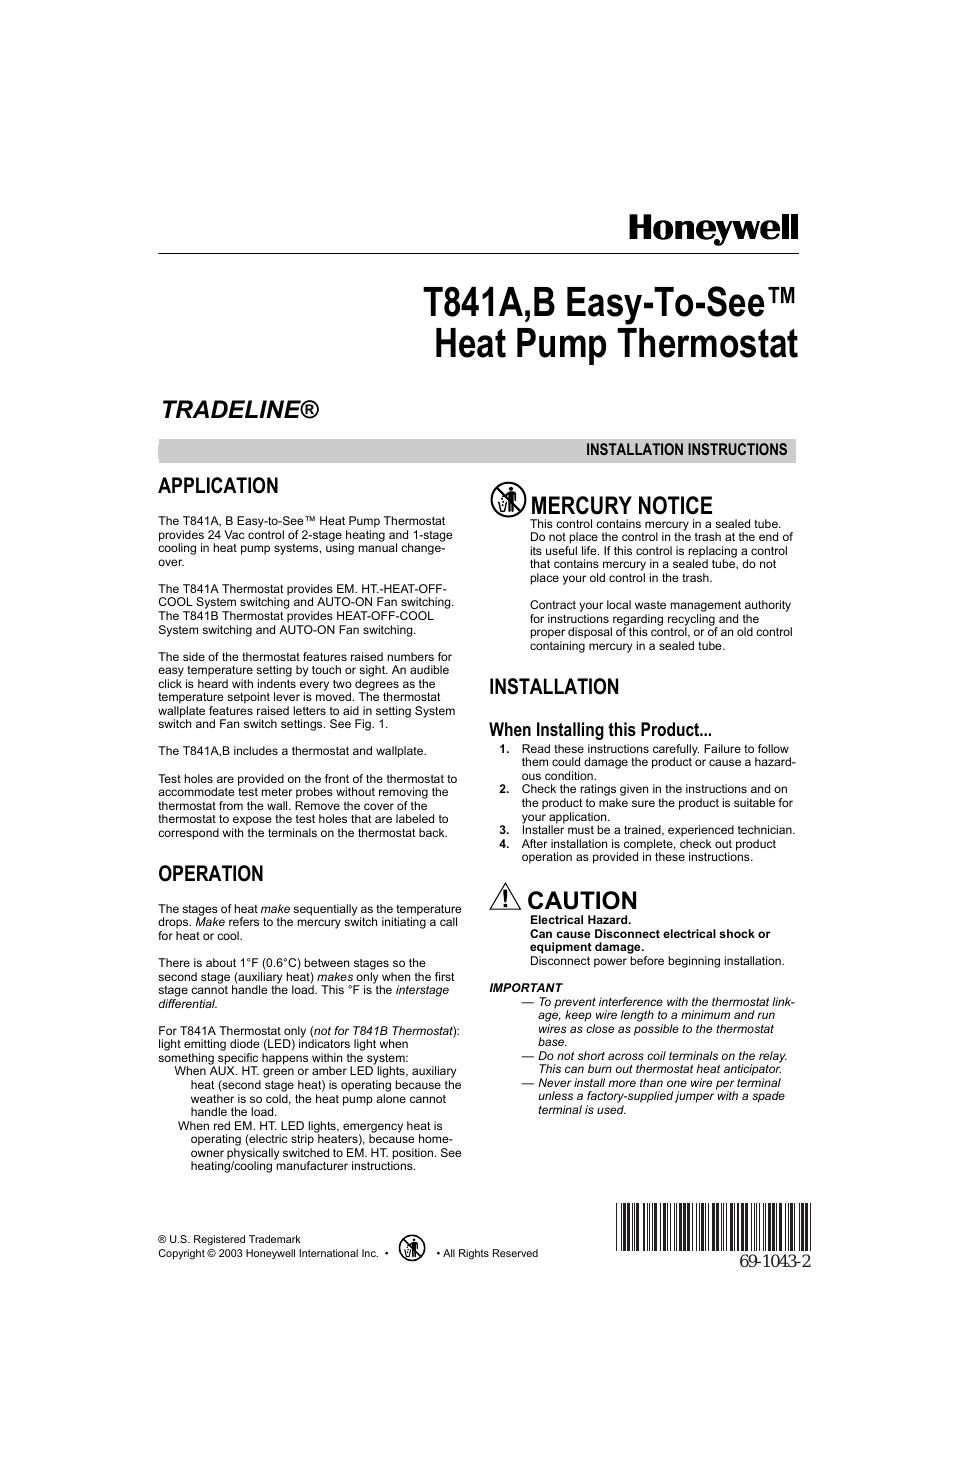 EASY-TO-SEE T841B